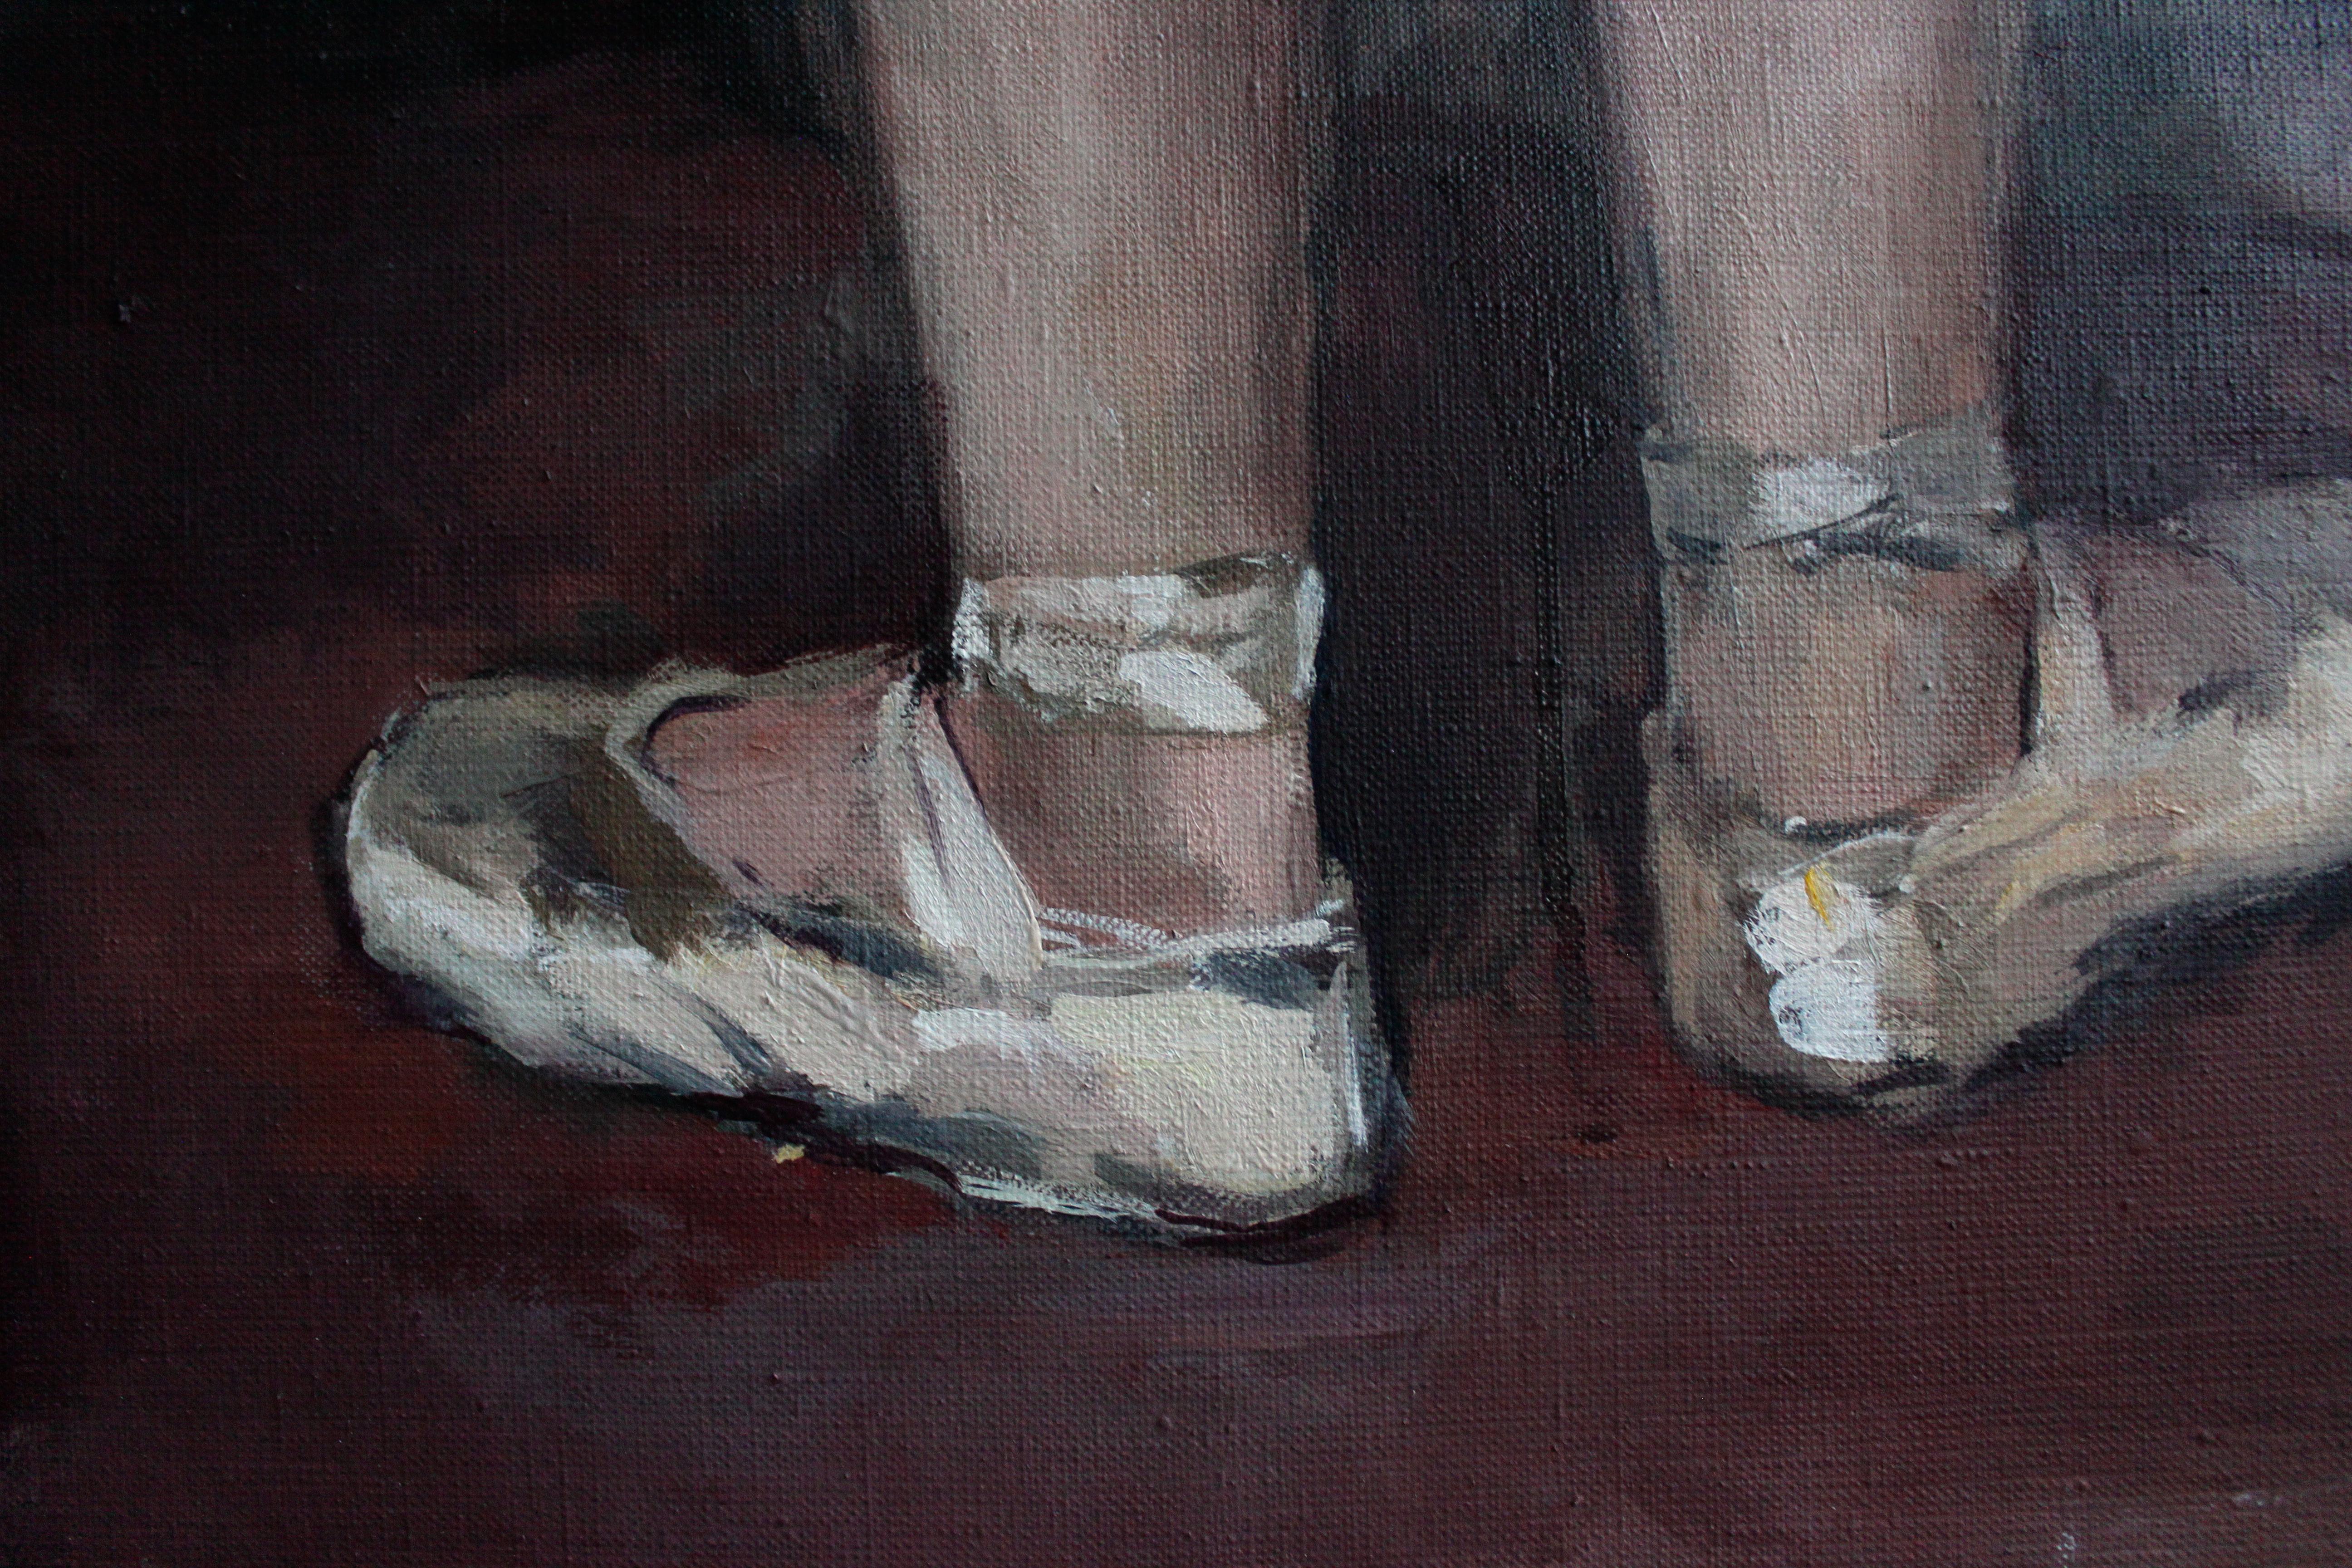 Ballerinas in Blue Tutus - 21st Century Contemporary Realism Oil Painting - Black Portrait Painting by Andrew Piankovski